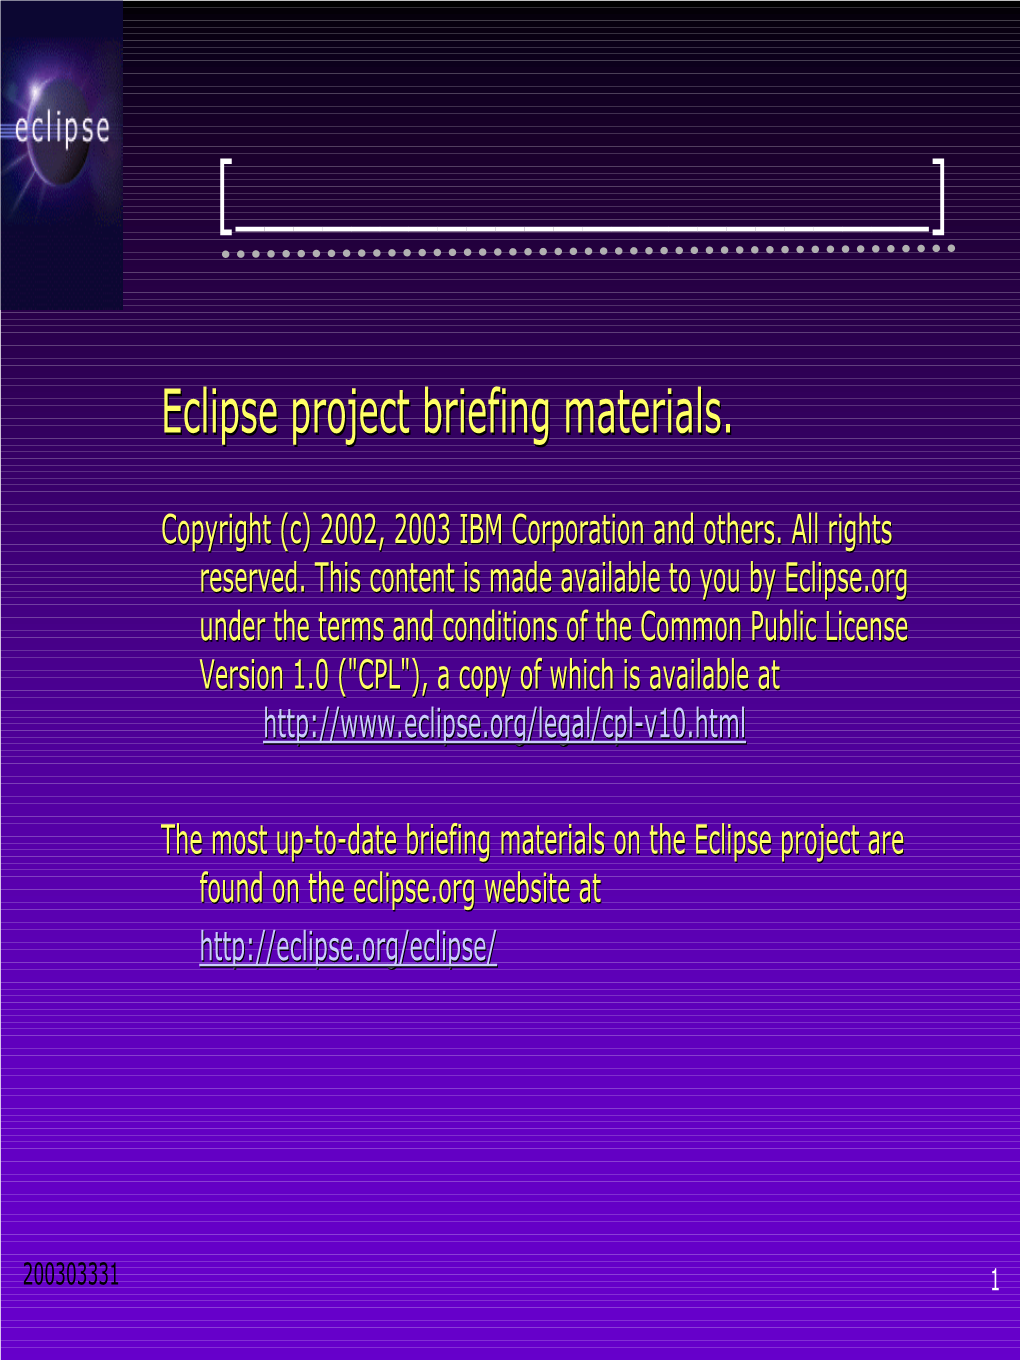 Eclipse Project Briefing Materials